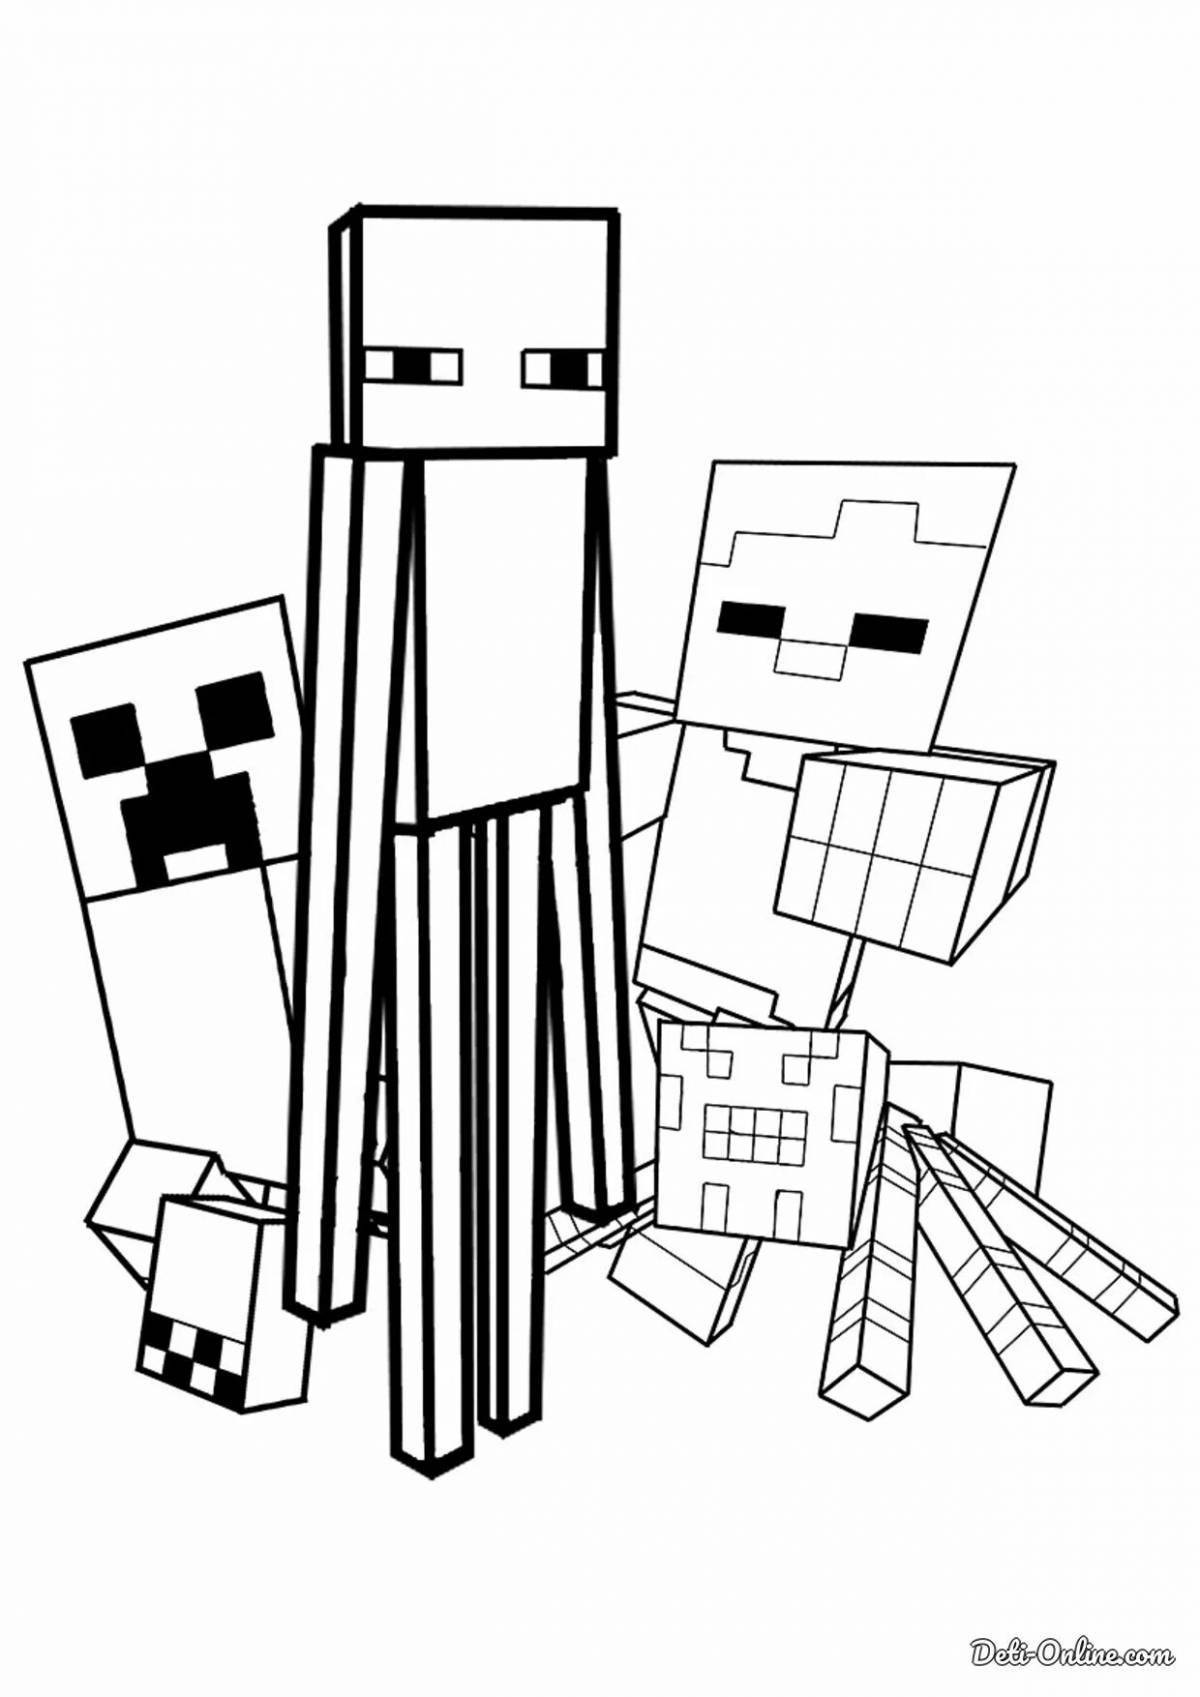 Attractive coloring page minecraft cover